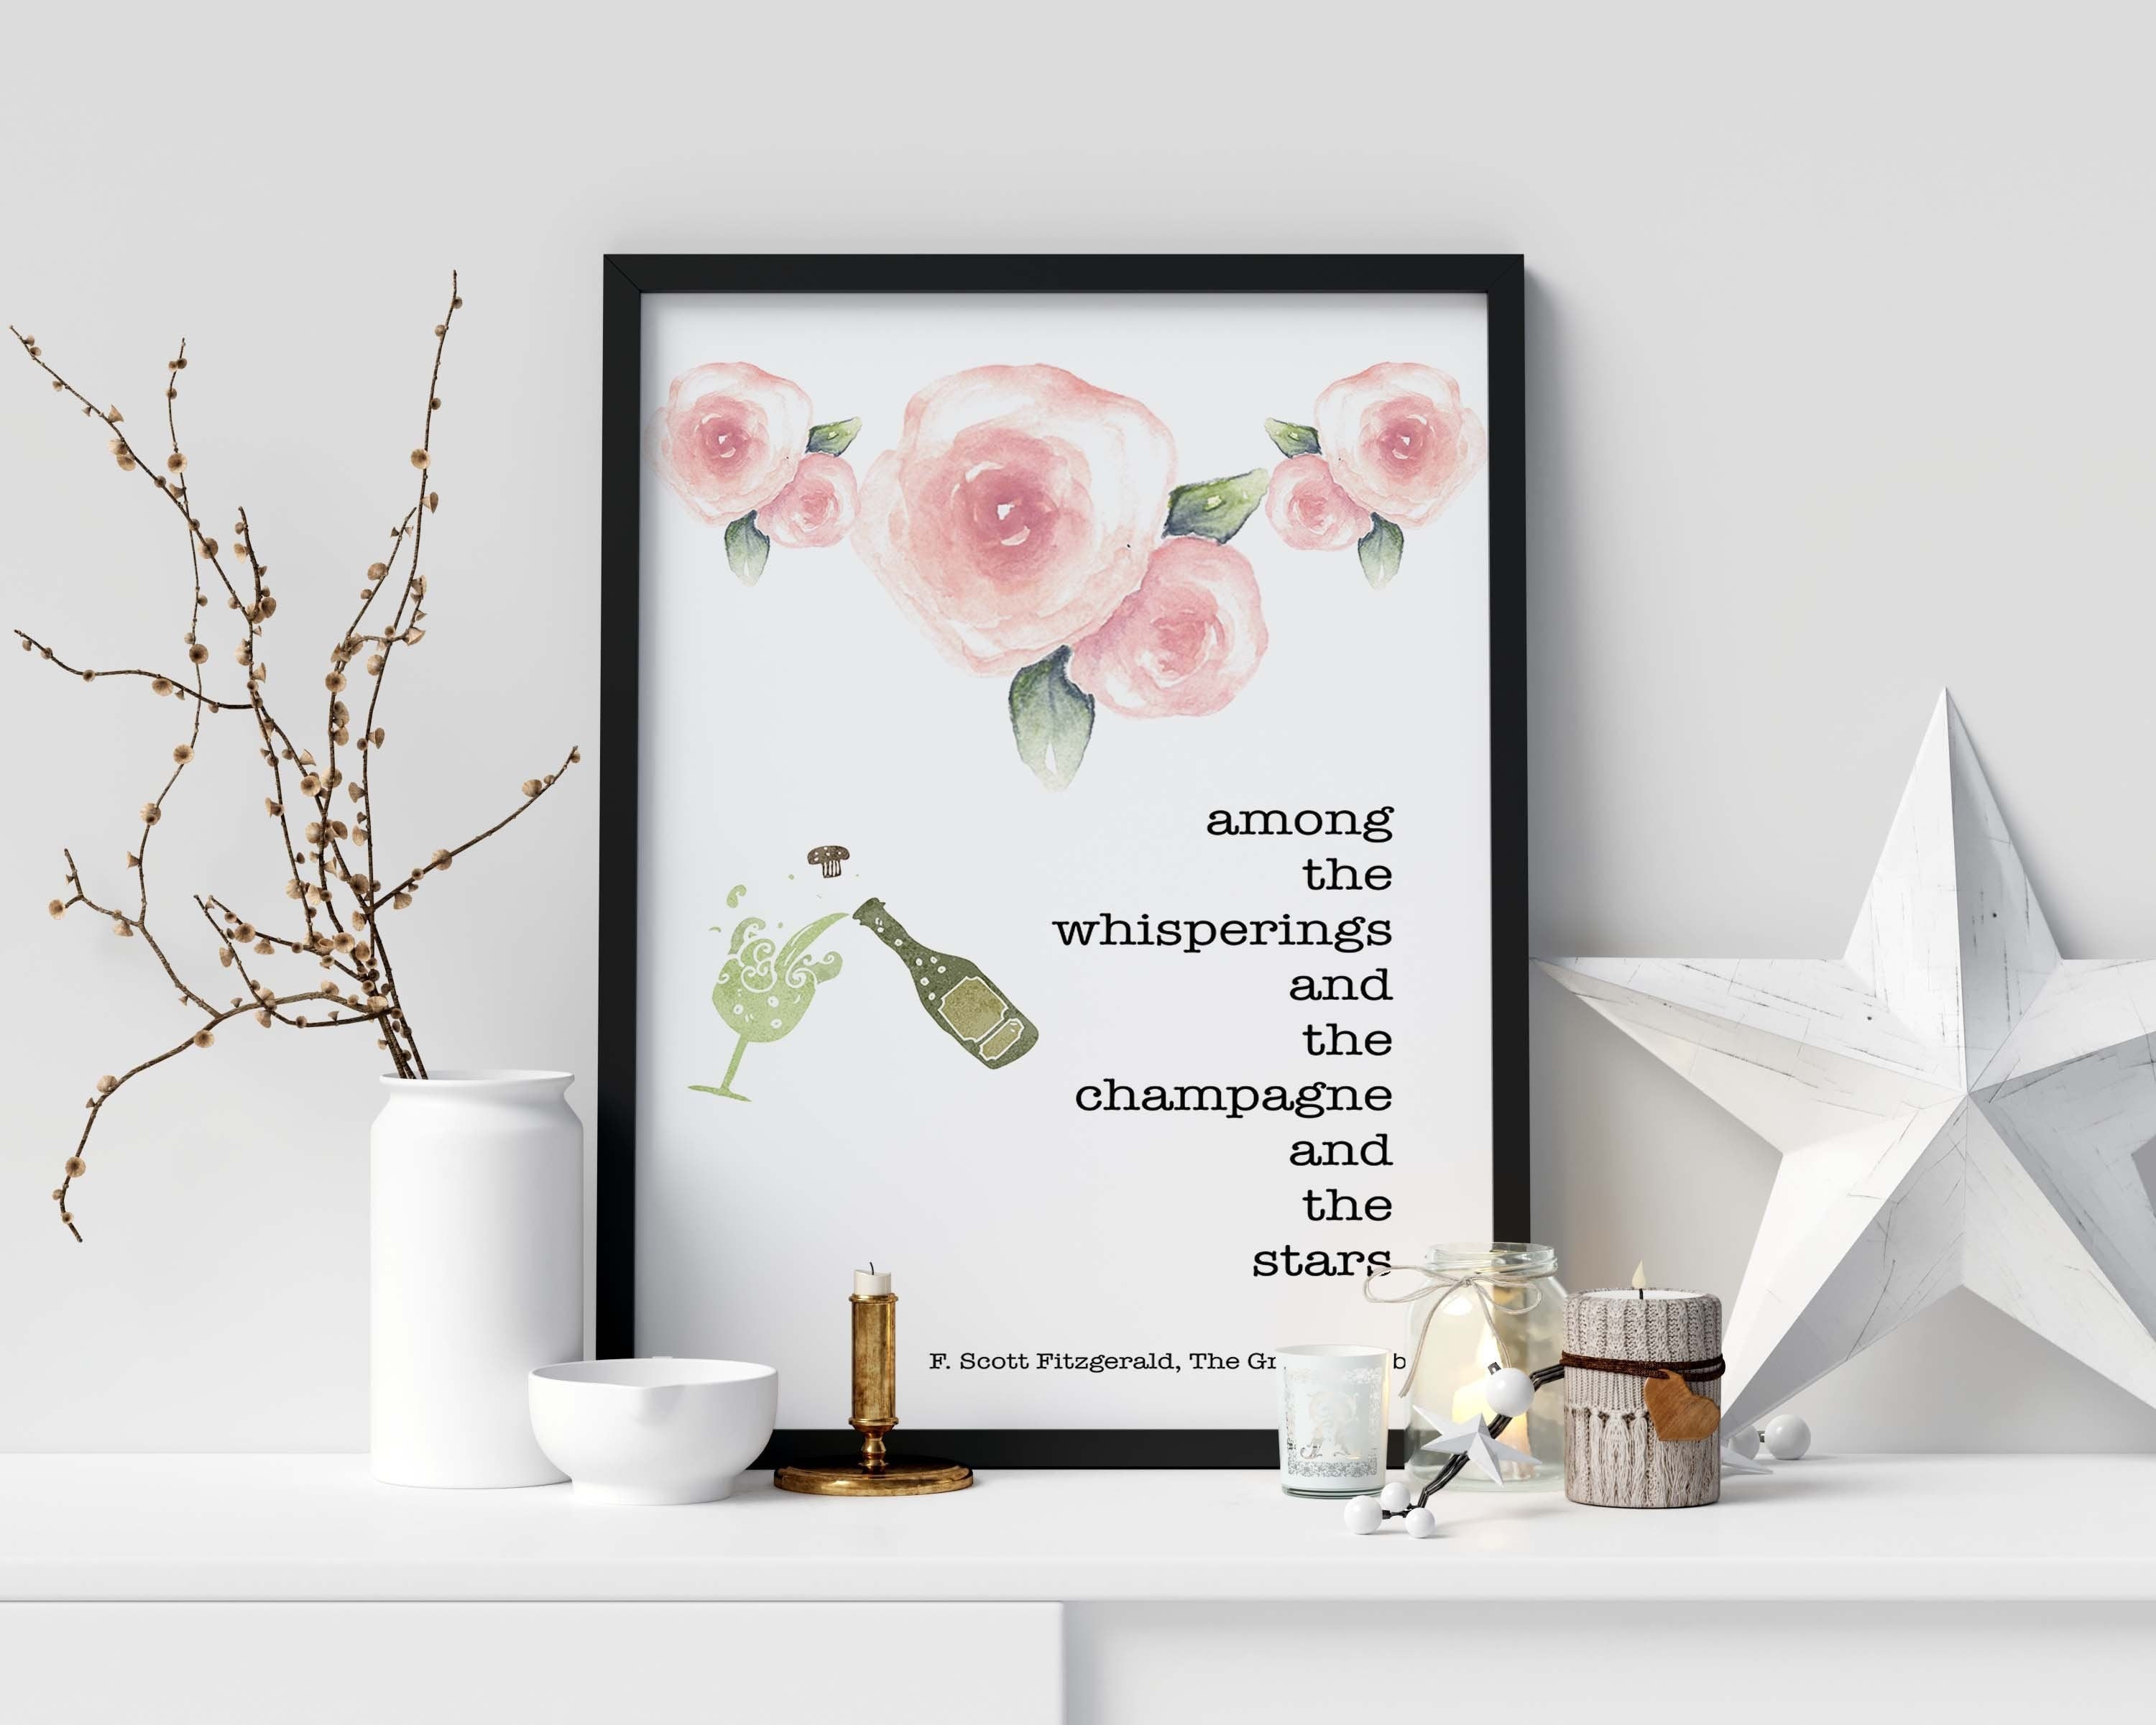 F Scott Fitzgerald Quote Champagne and Stars Great Gatsby Quote Print in White, Green and Pink for Living Room or Bedroom Wall  Decor